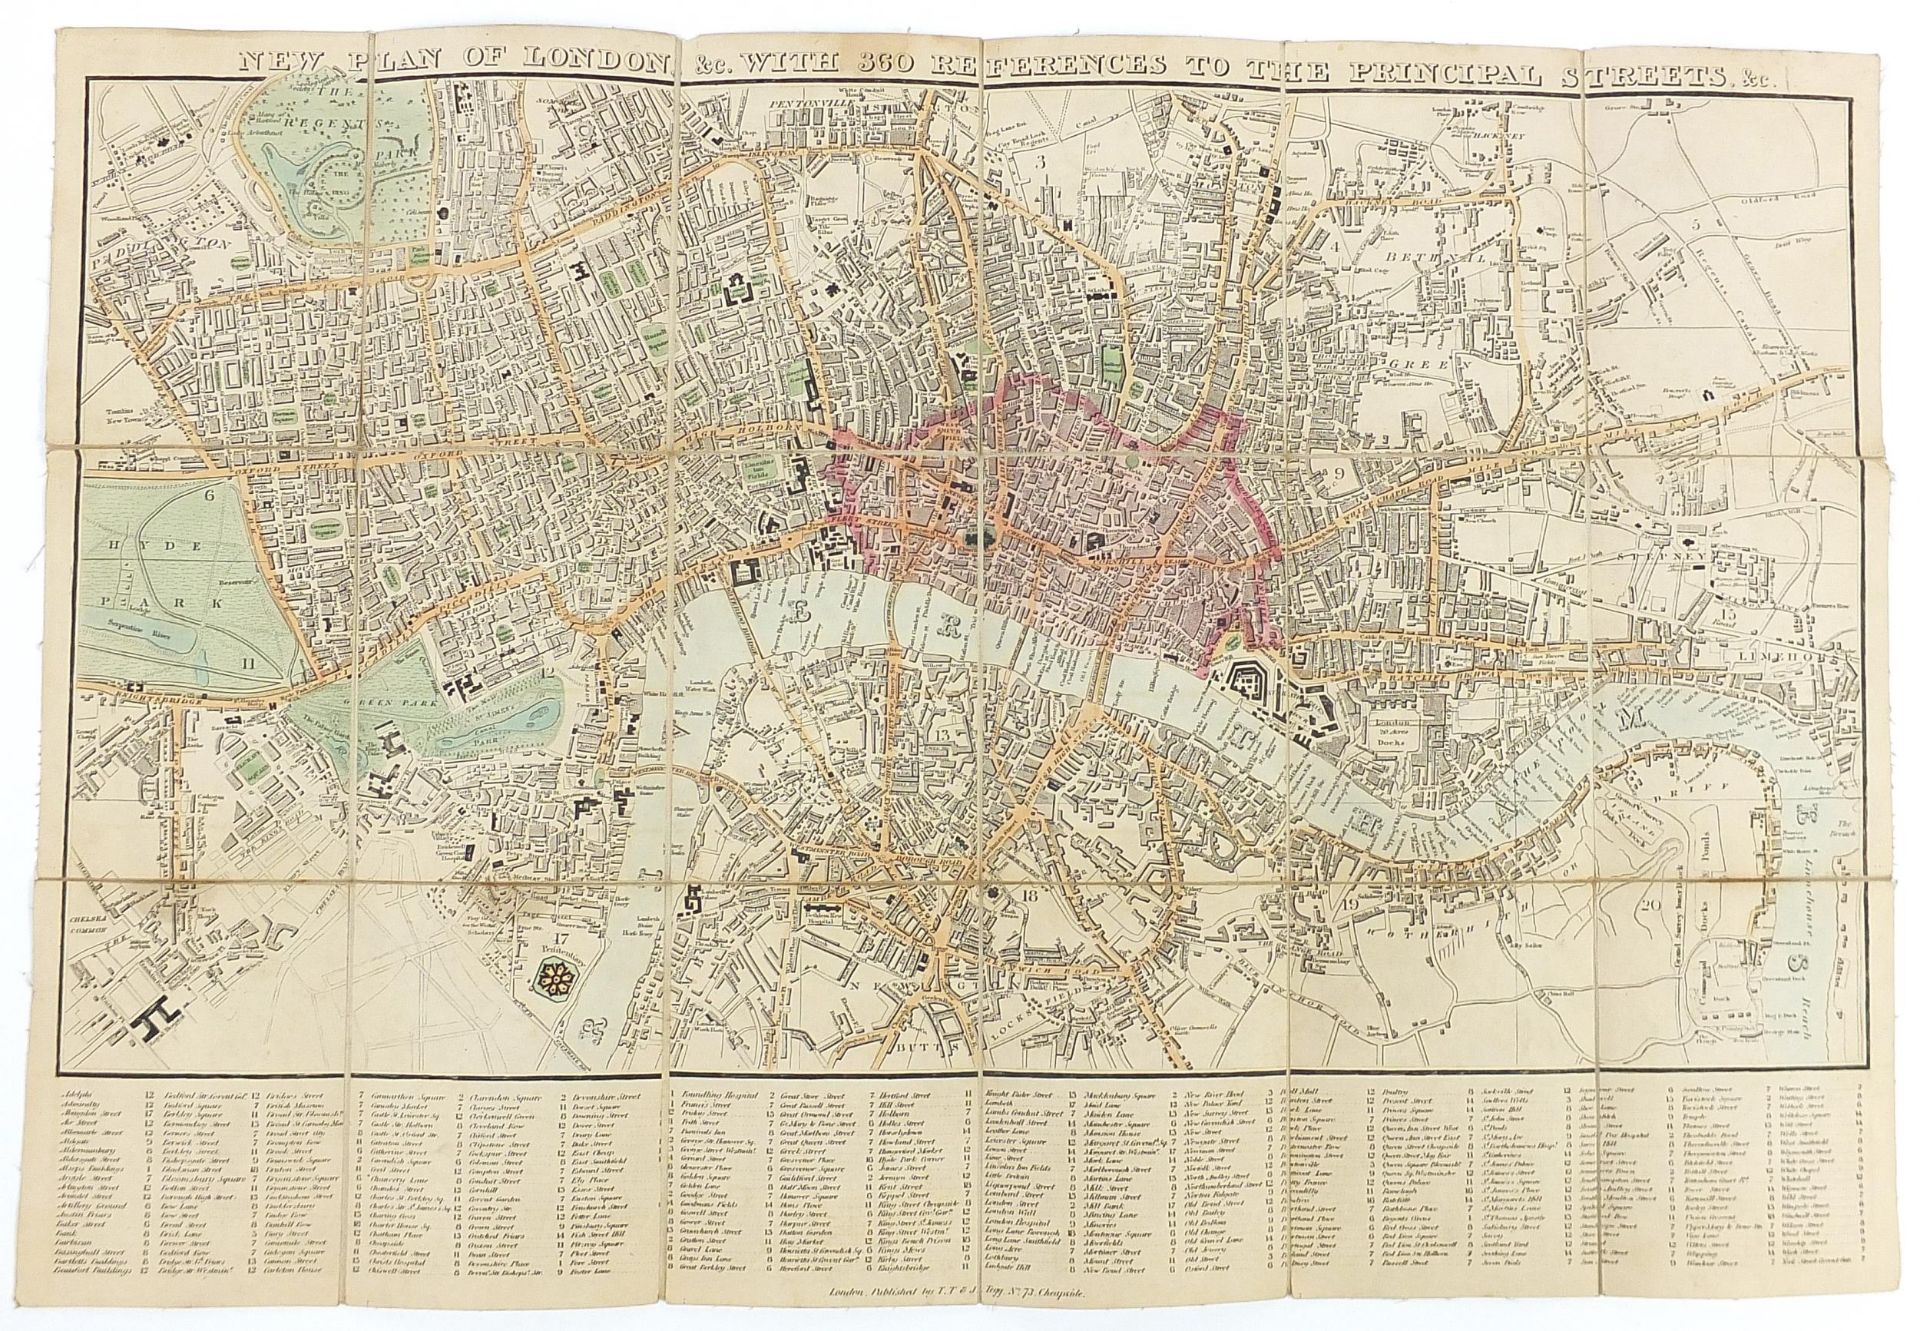 19th century canvas backed folding map of London & Westminster, published London TT & J Tegg, the